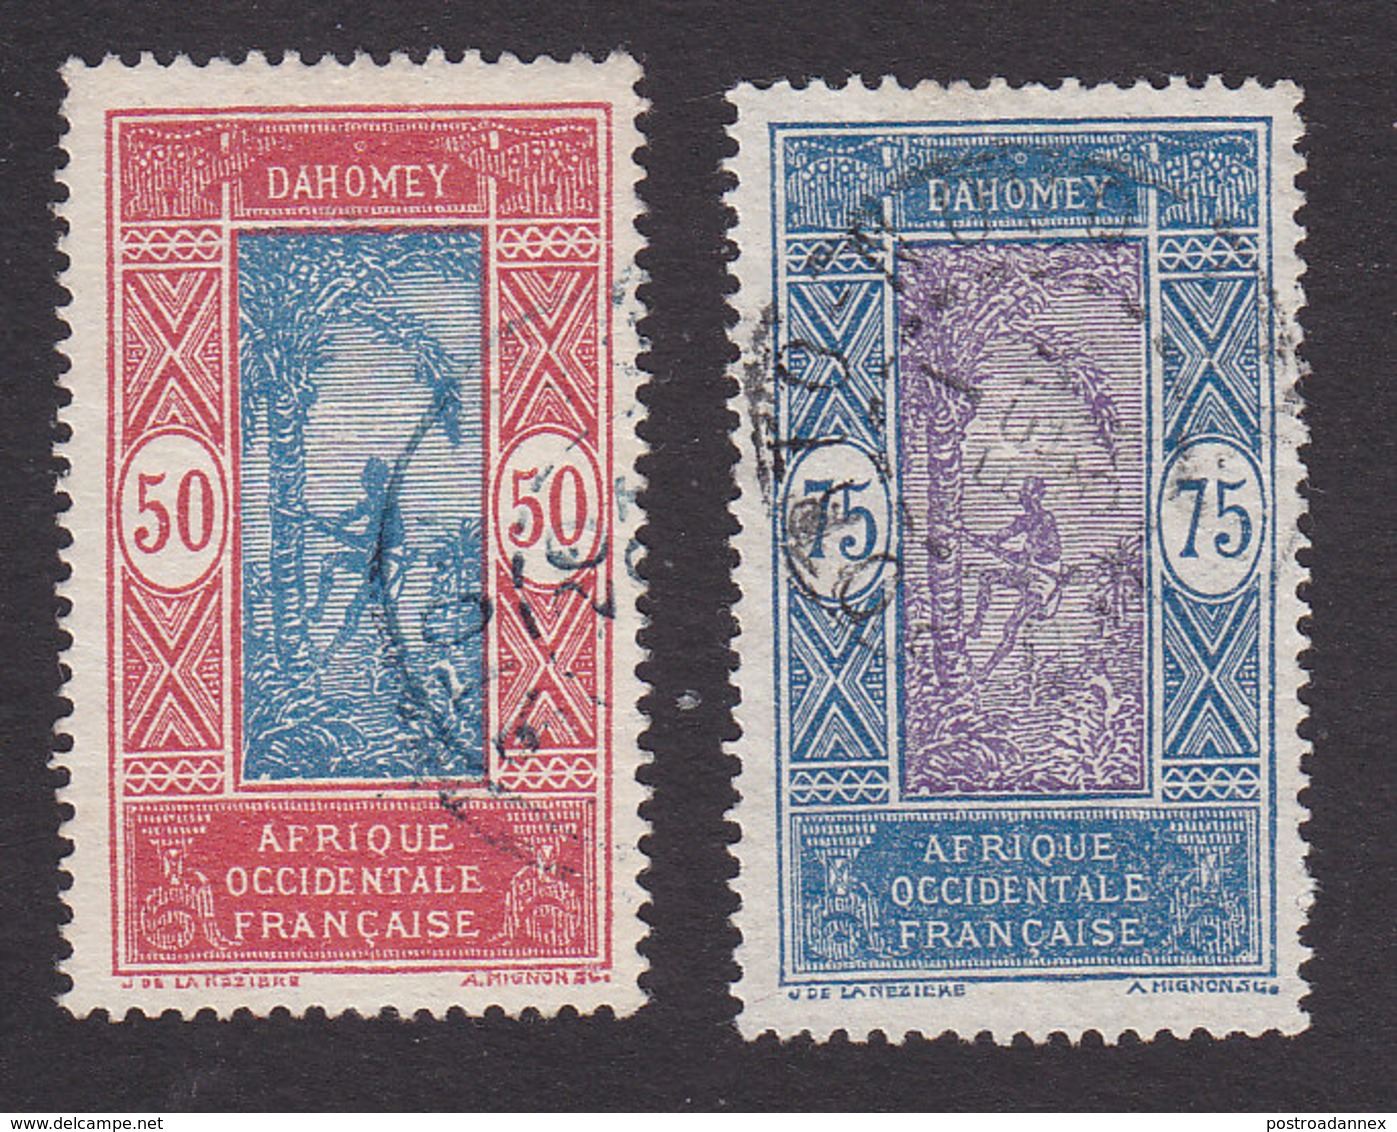 Dahomey, Scott #66, 70, Used, Man Climbing Oil Palm, Issued 1913 - Used Stamps